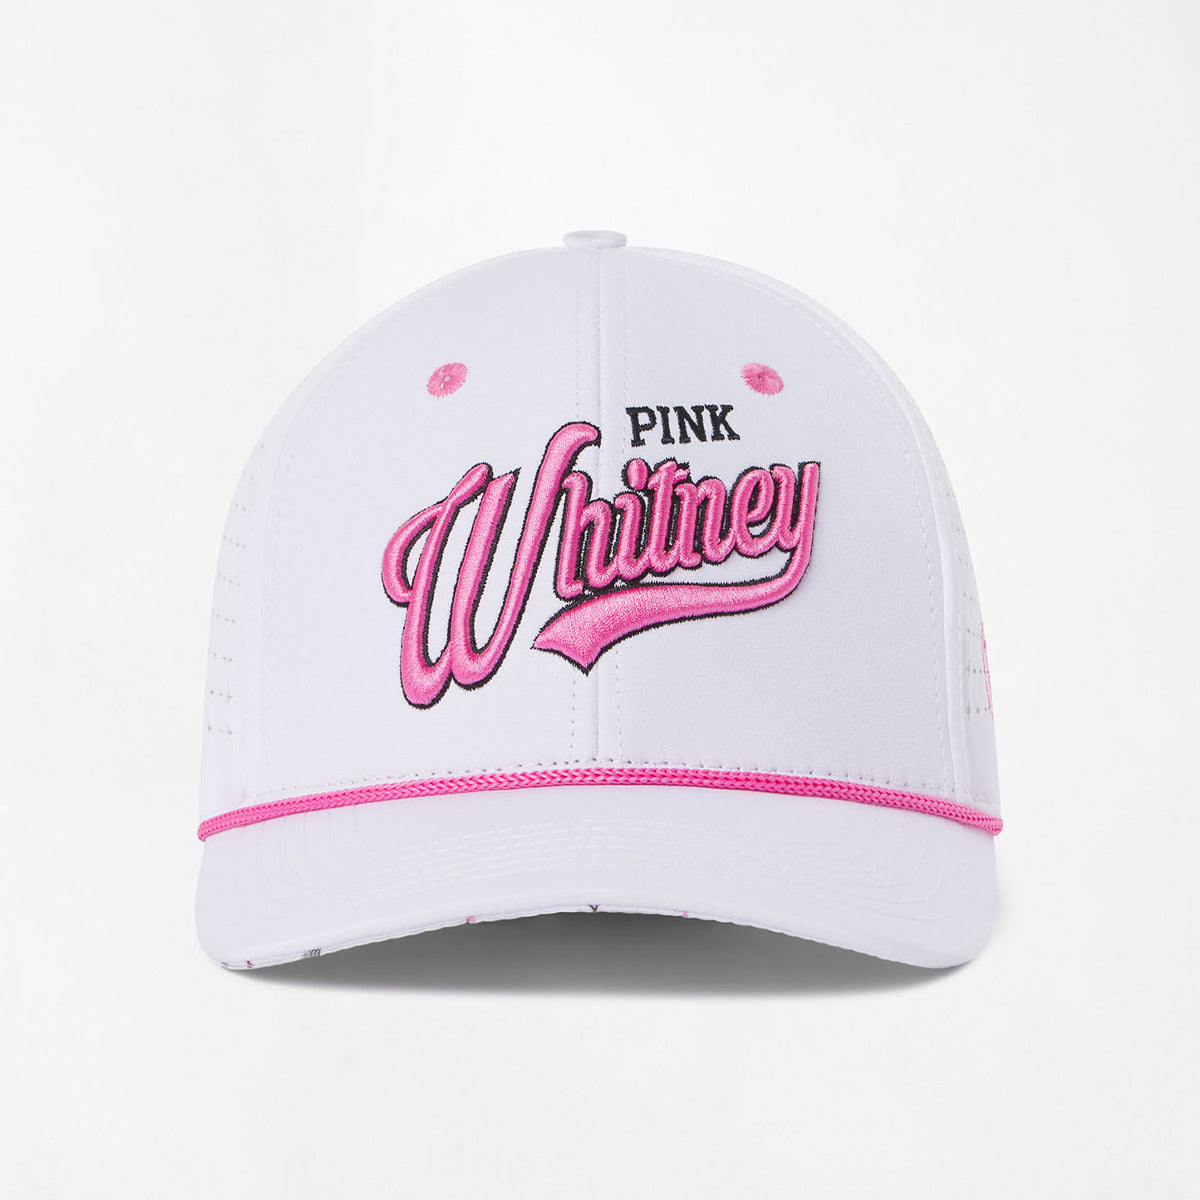 UNRL x Pink Whitney Script Vintage Rope Hat-Hats-Pink Whitney-White-Barstool Sports